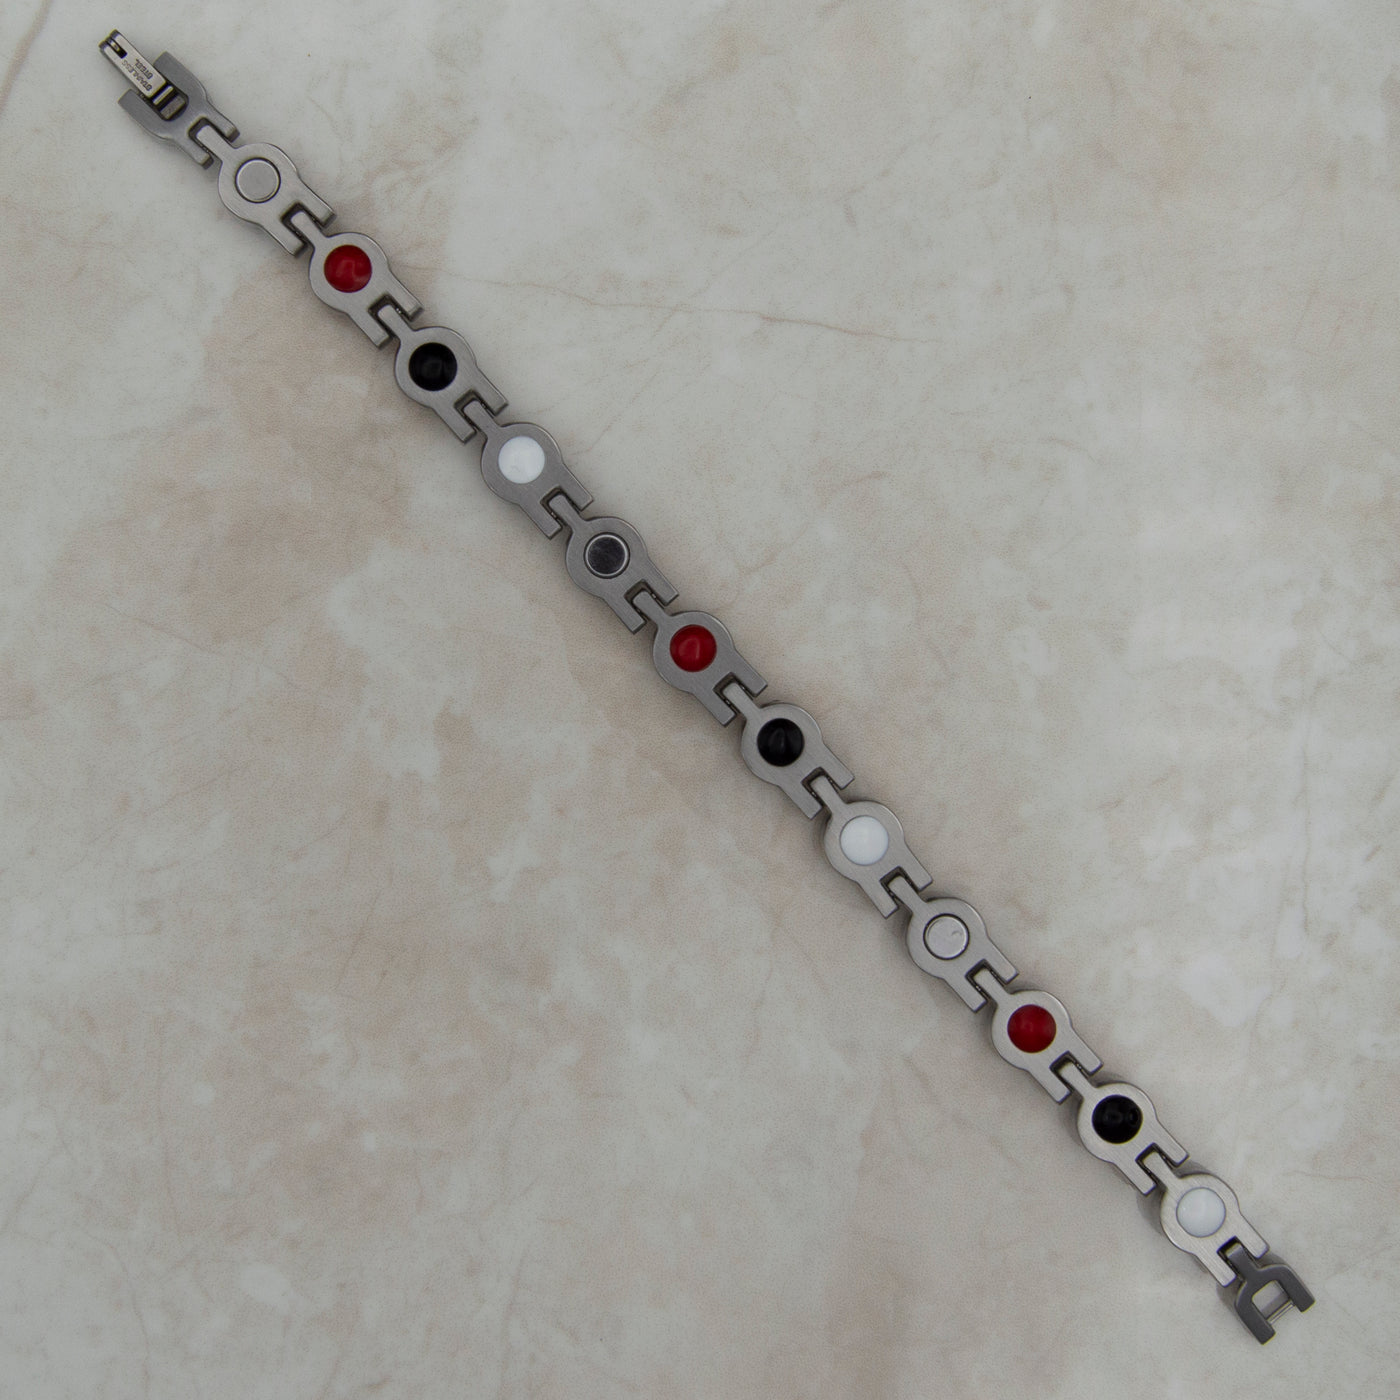 Back view of our April birthstone Magnetic bracelet for women as part of the Triple gift set - shows the 4 health elements : Negative ions, FIR elements, Germanium and Neodynium magnets